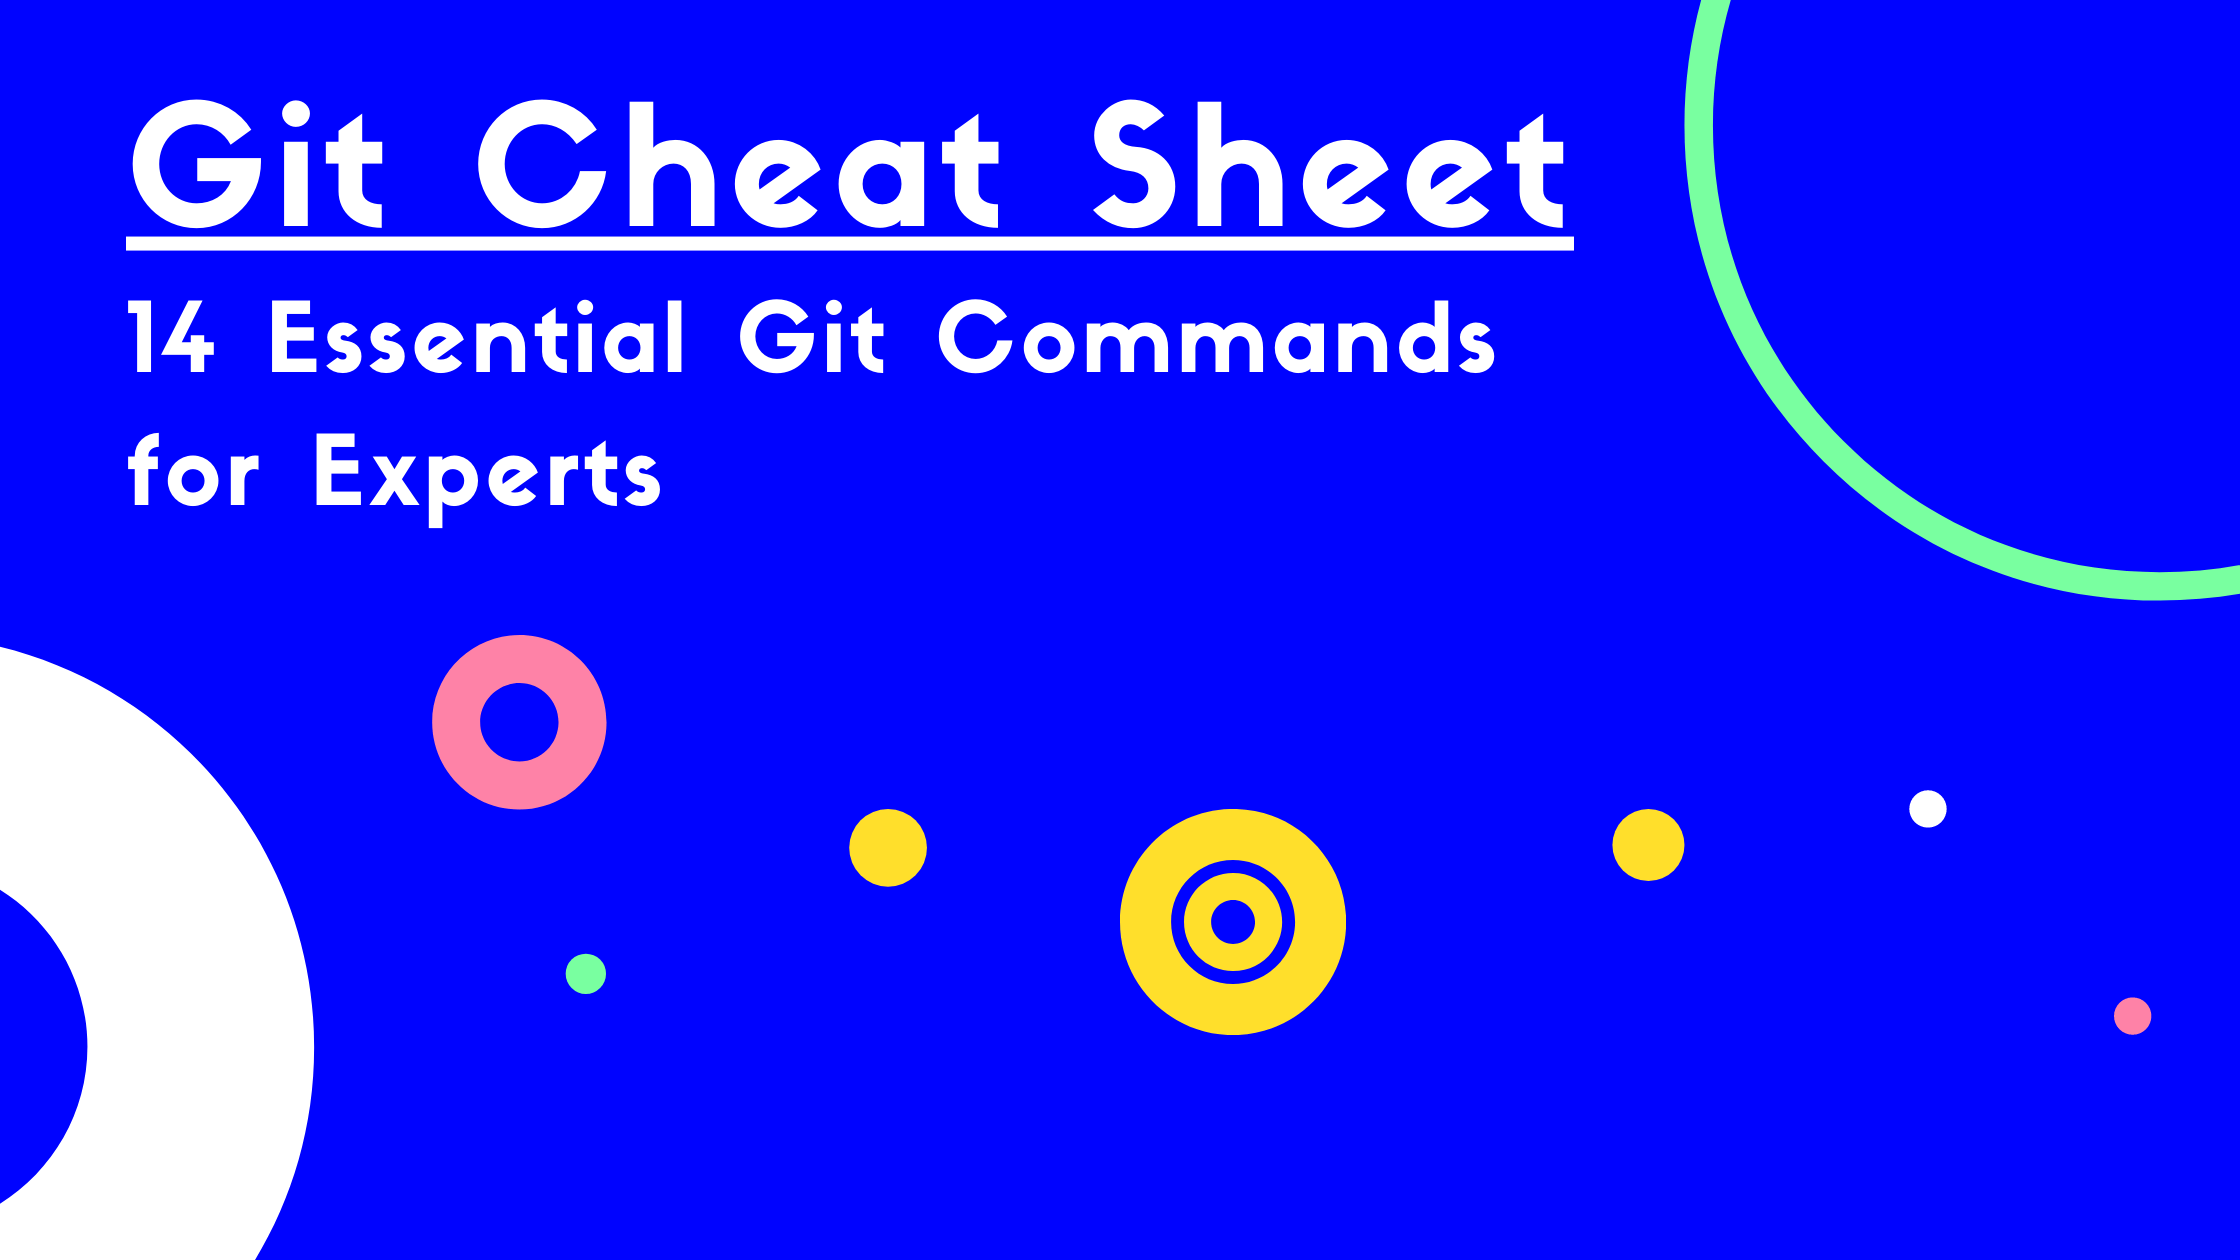 Image of Git Cheat Sheet: 14 Essential Git Commands for Experts